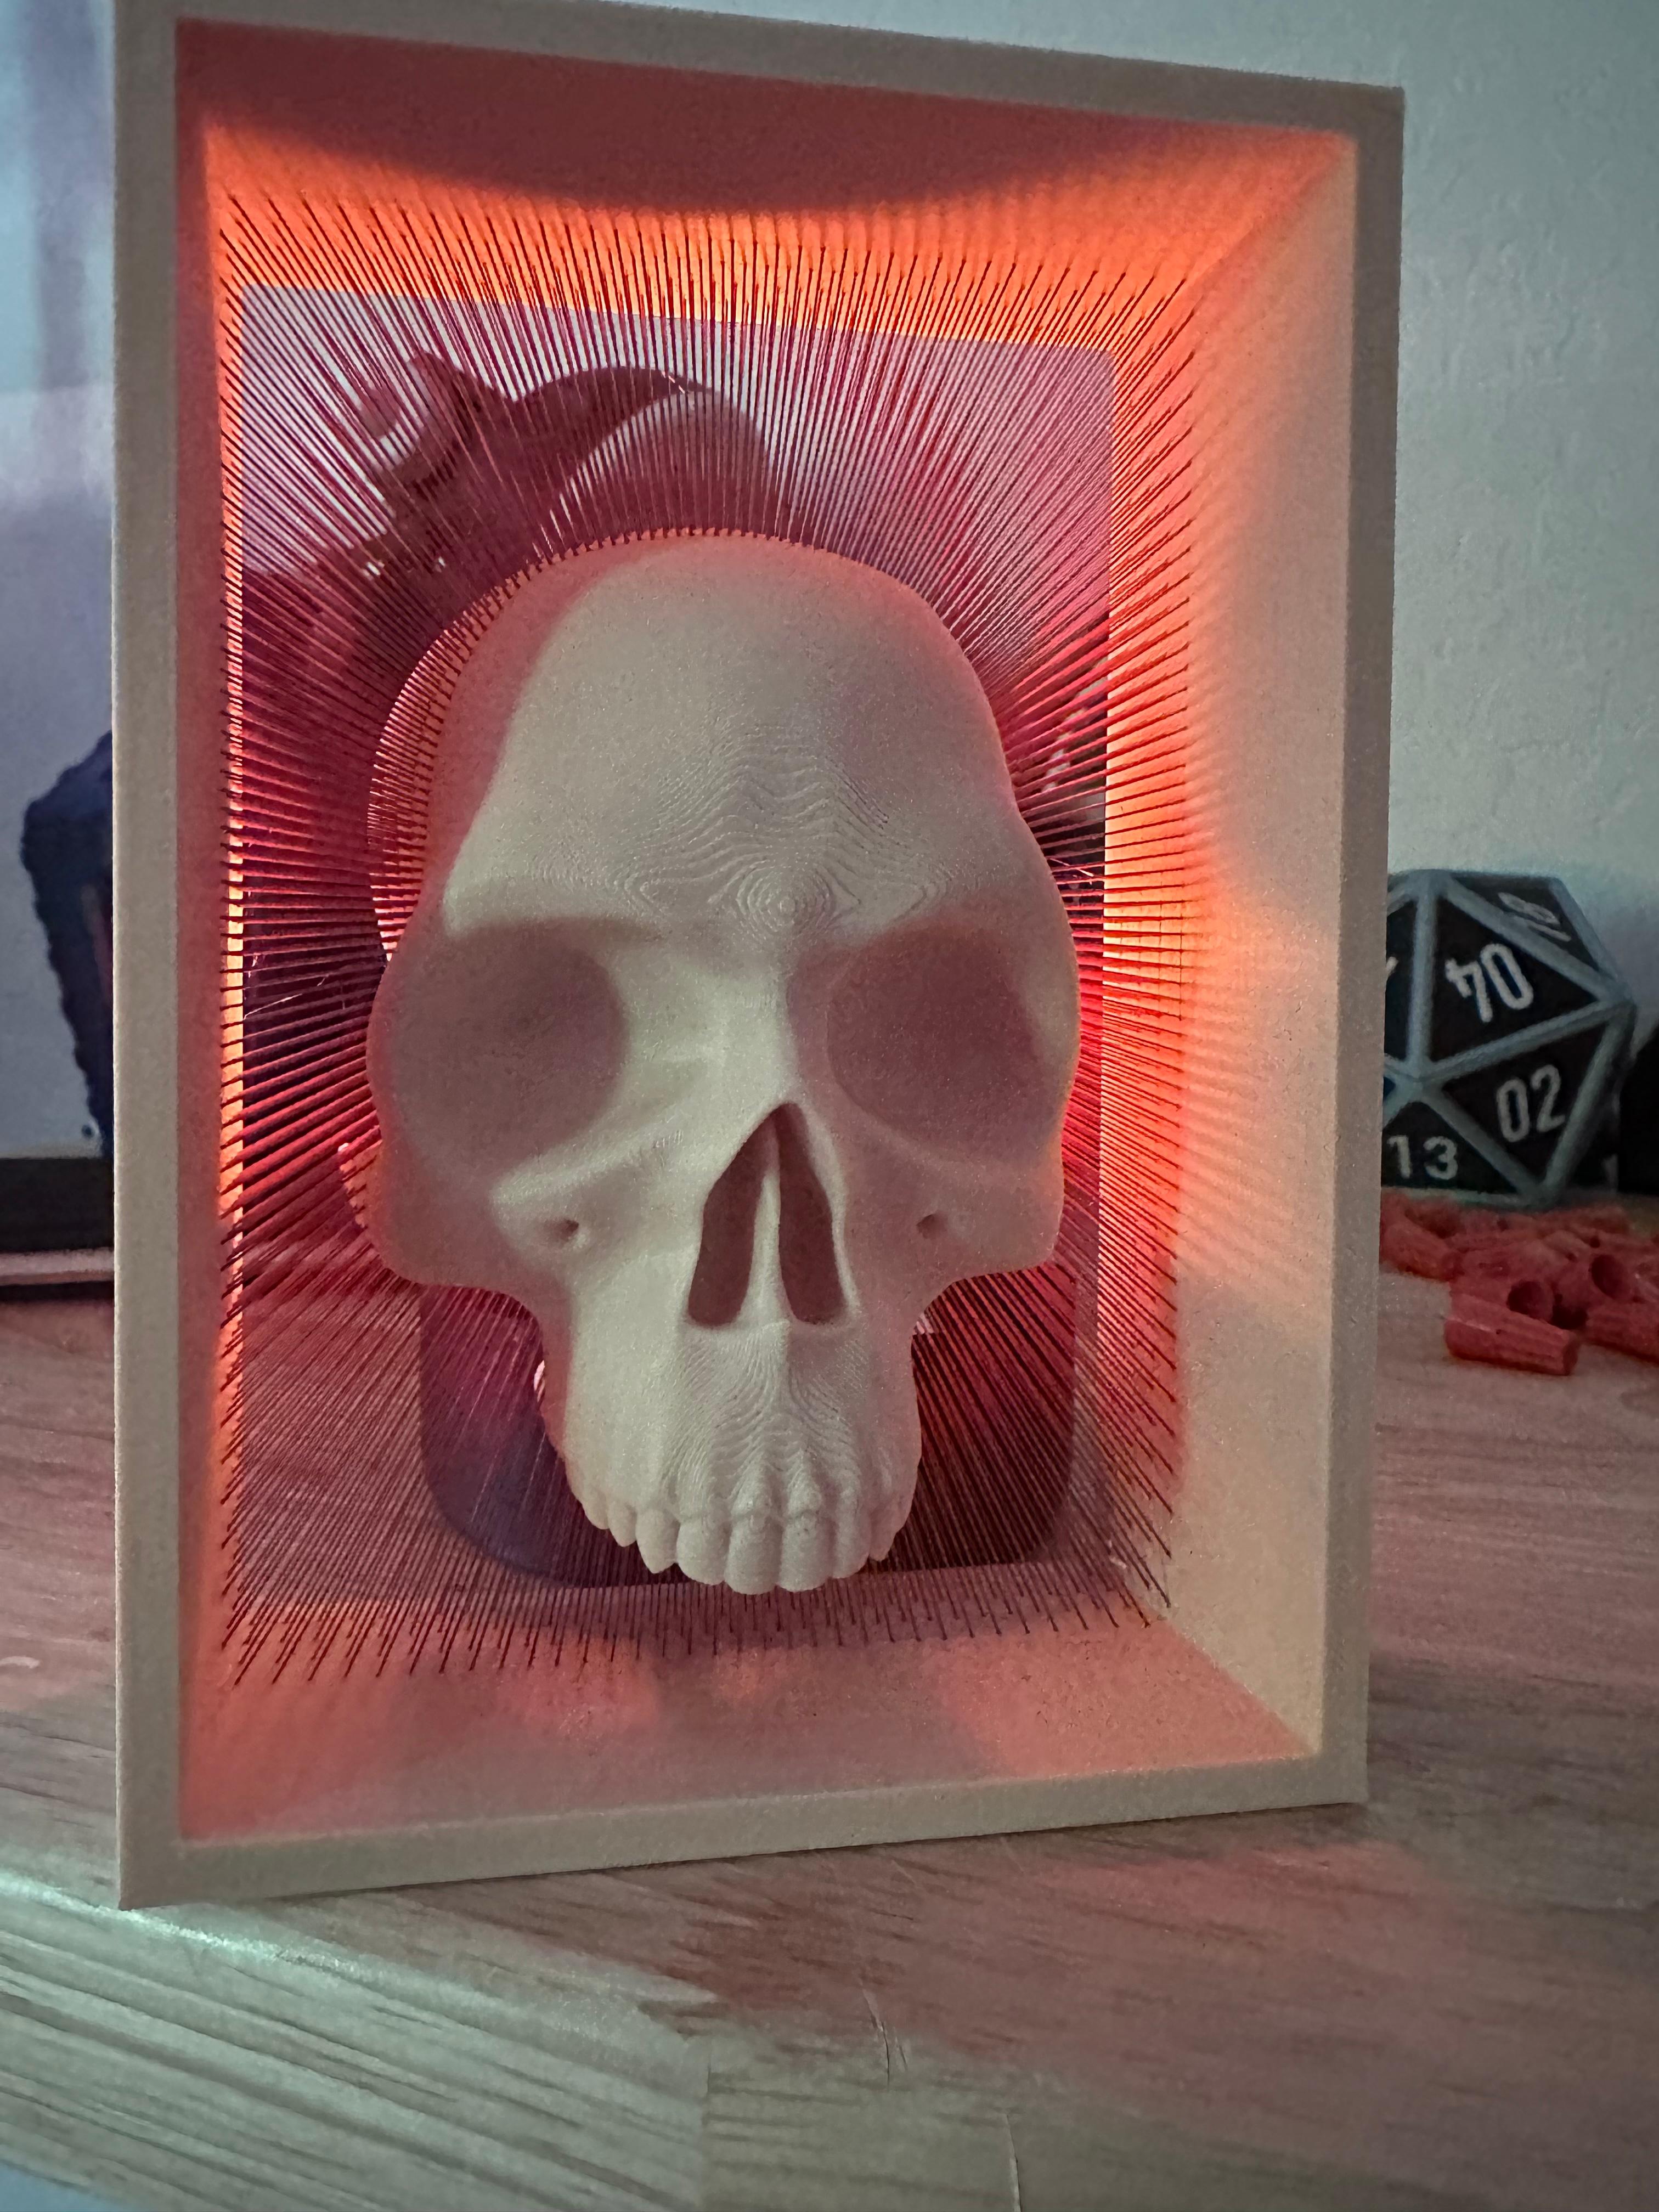 SPOOKY SKULL SHADOW BOX - STRING MODEL PAINTED FOR BAMBULAB MMU 3d model